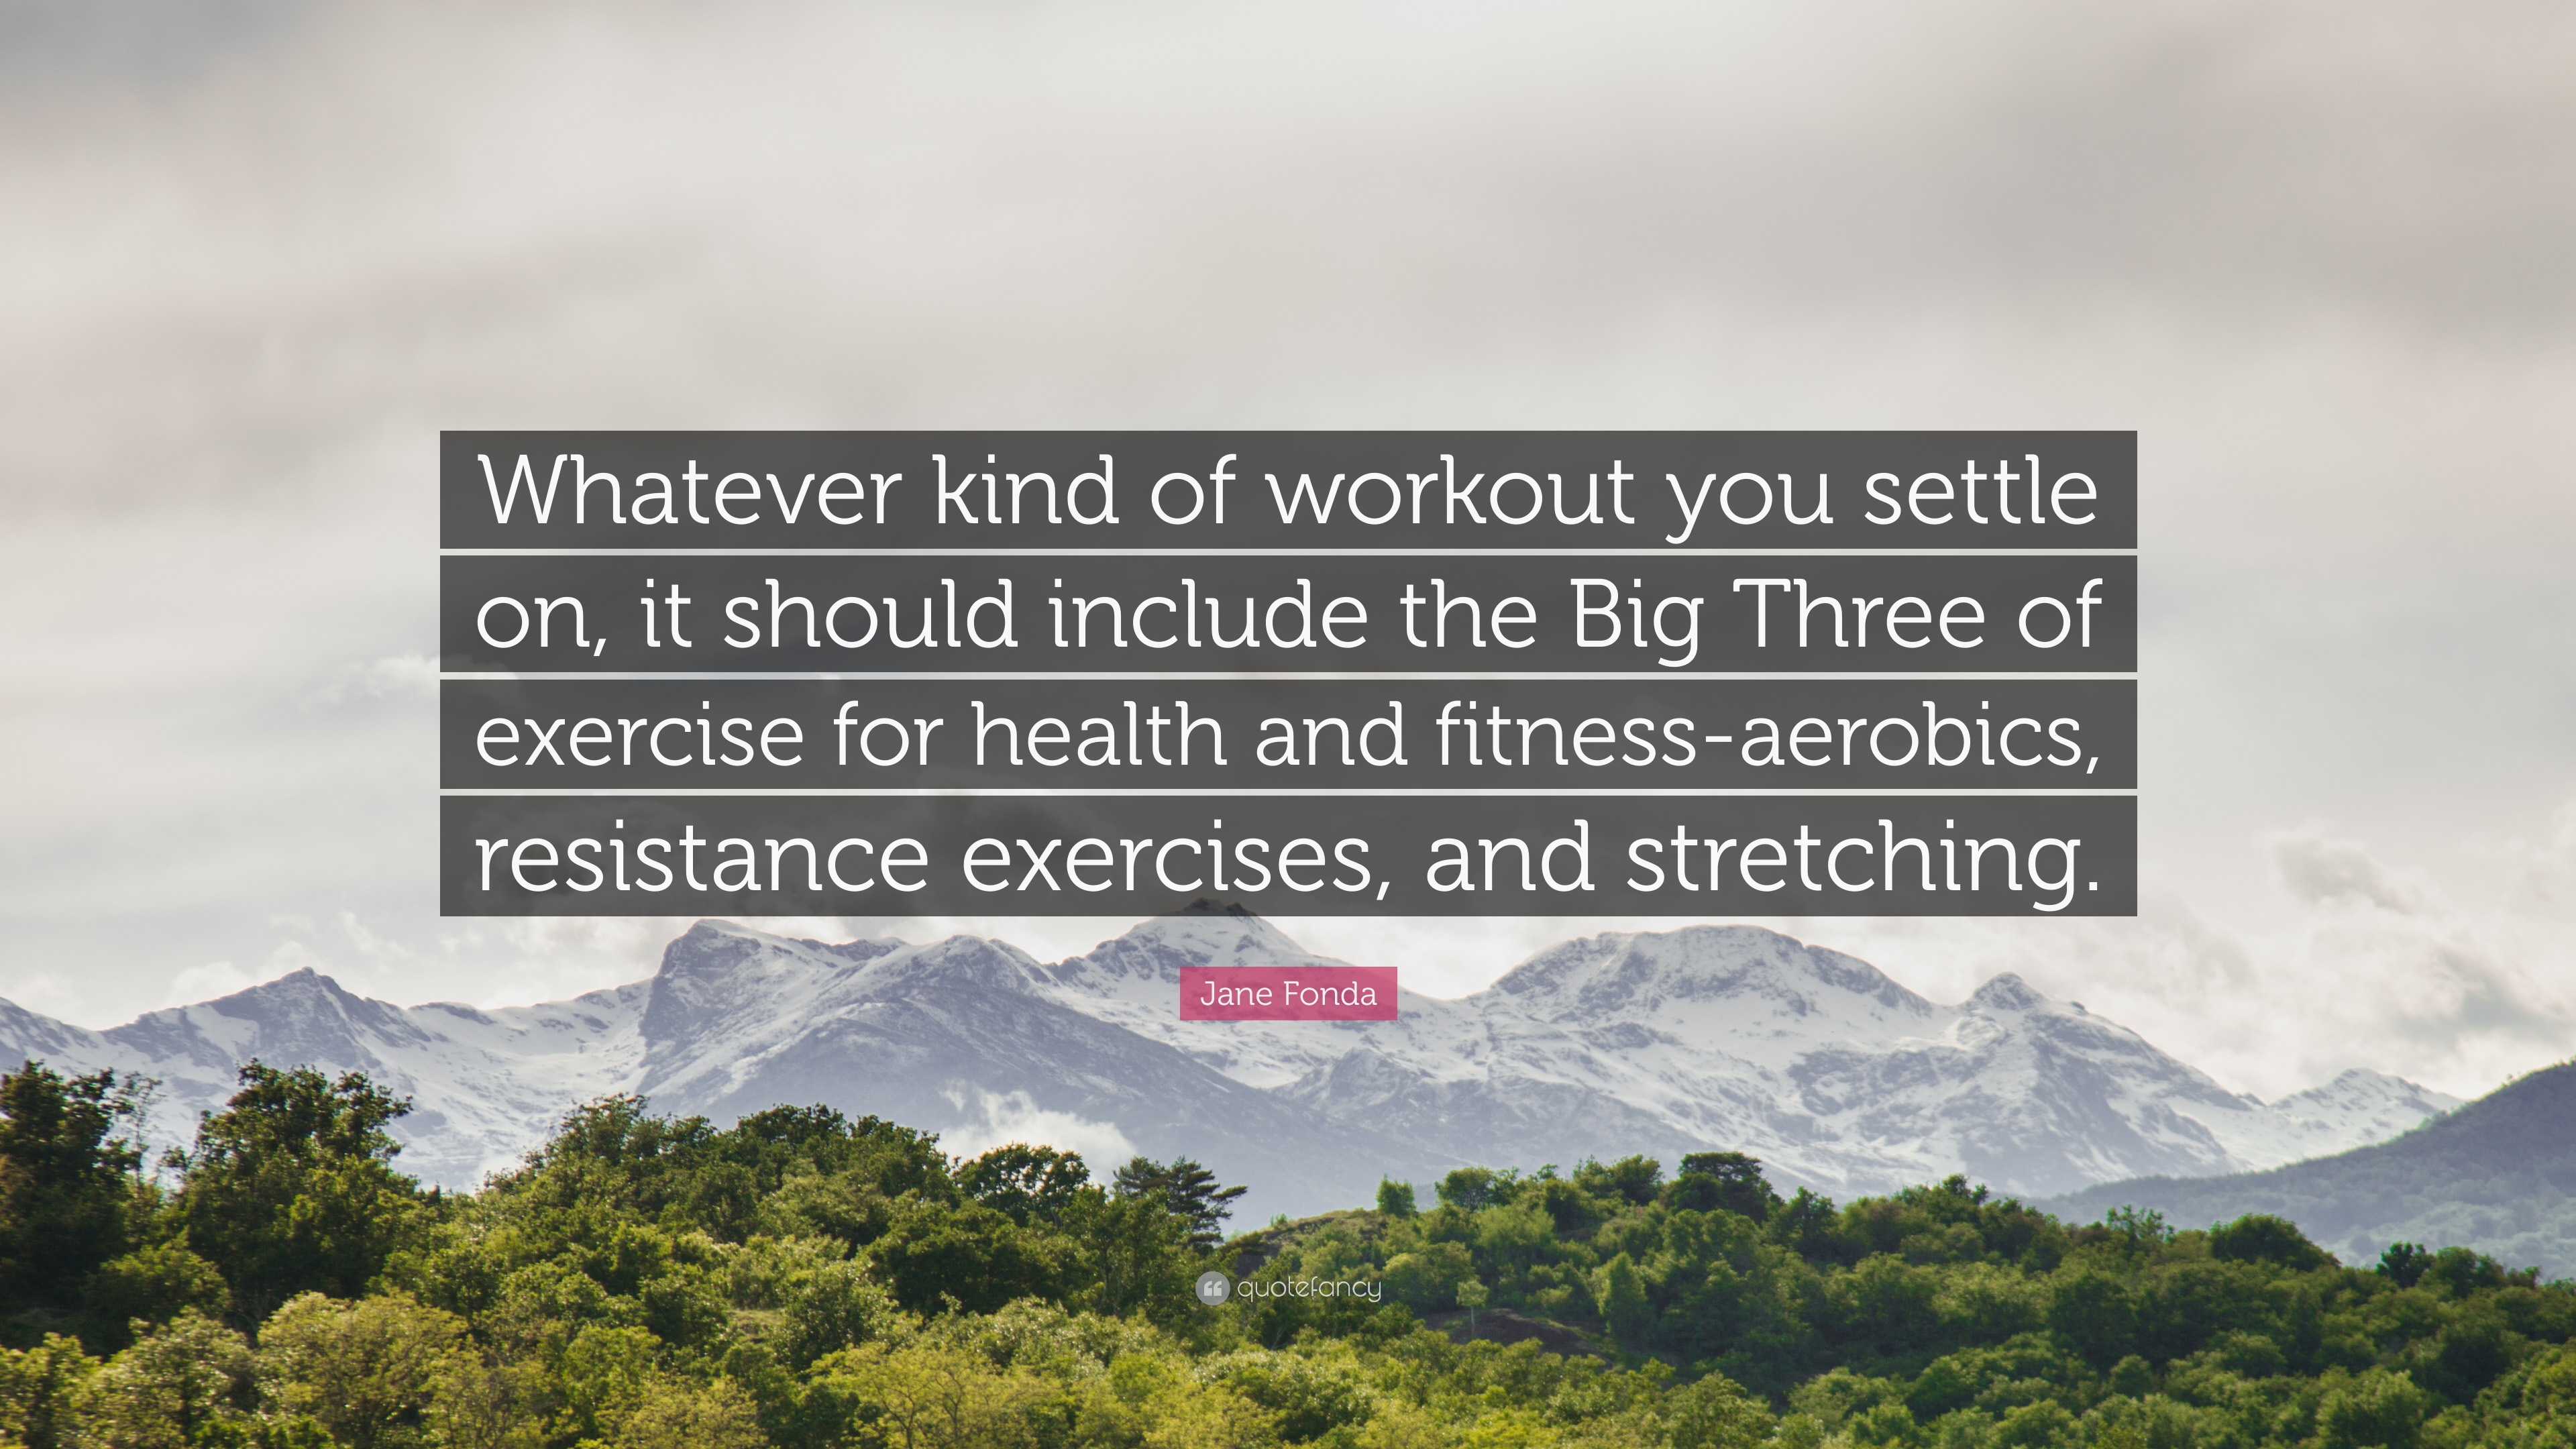 Jane Fonda Quote: “Whatever kind of workout you settle on, it should